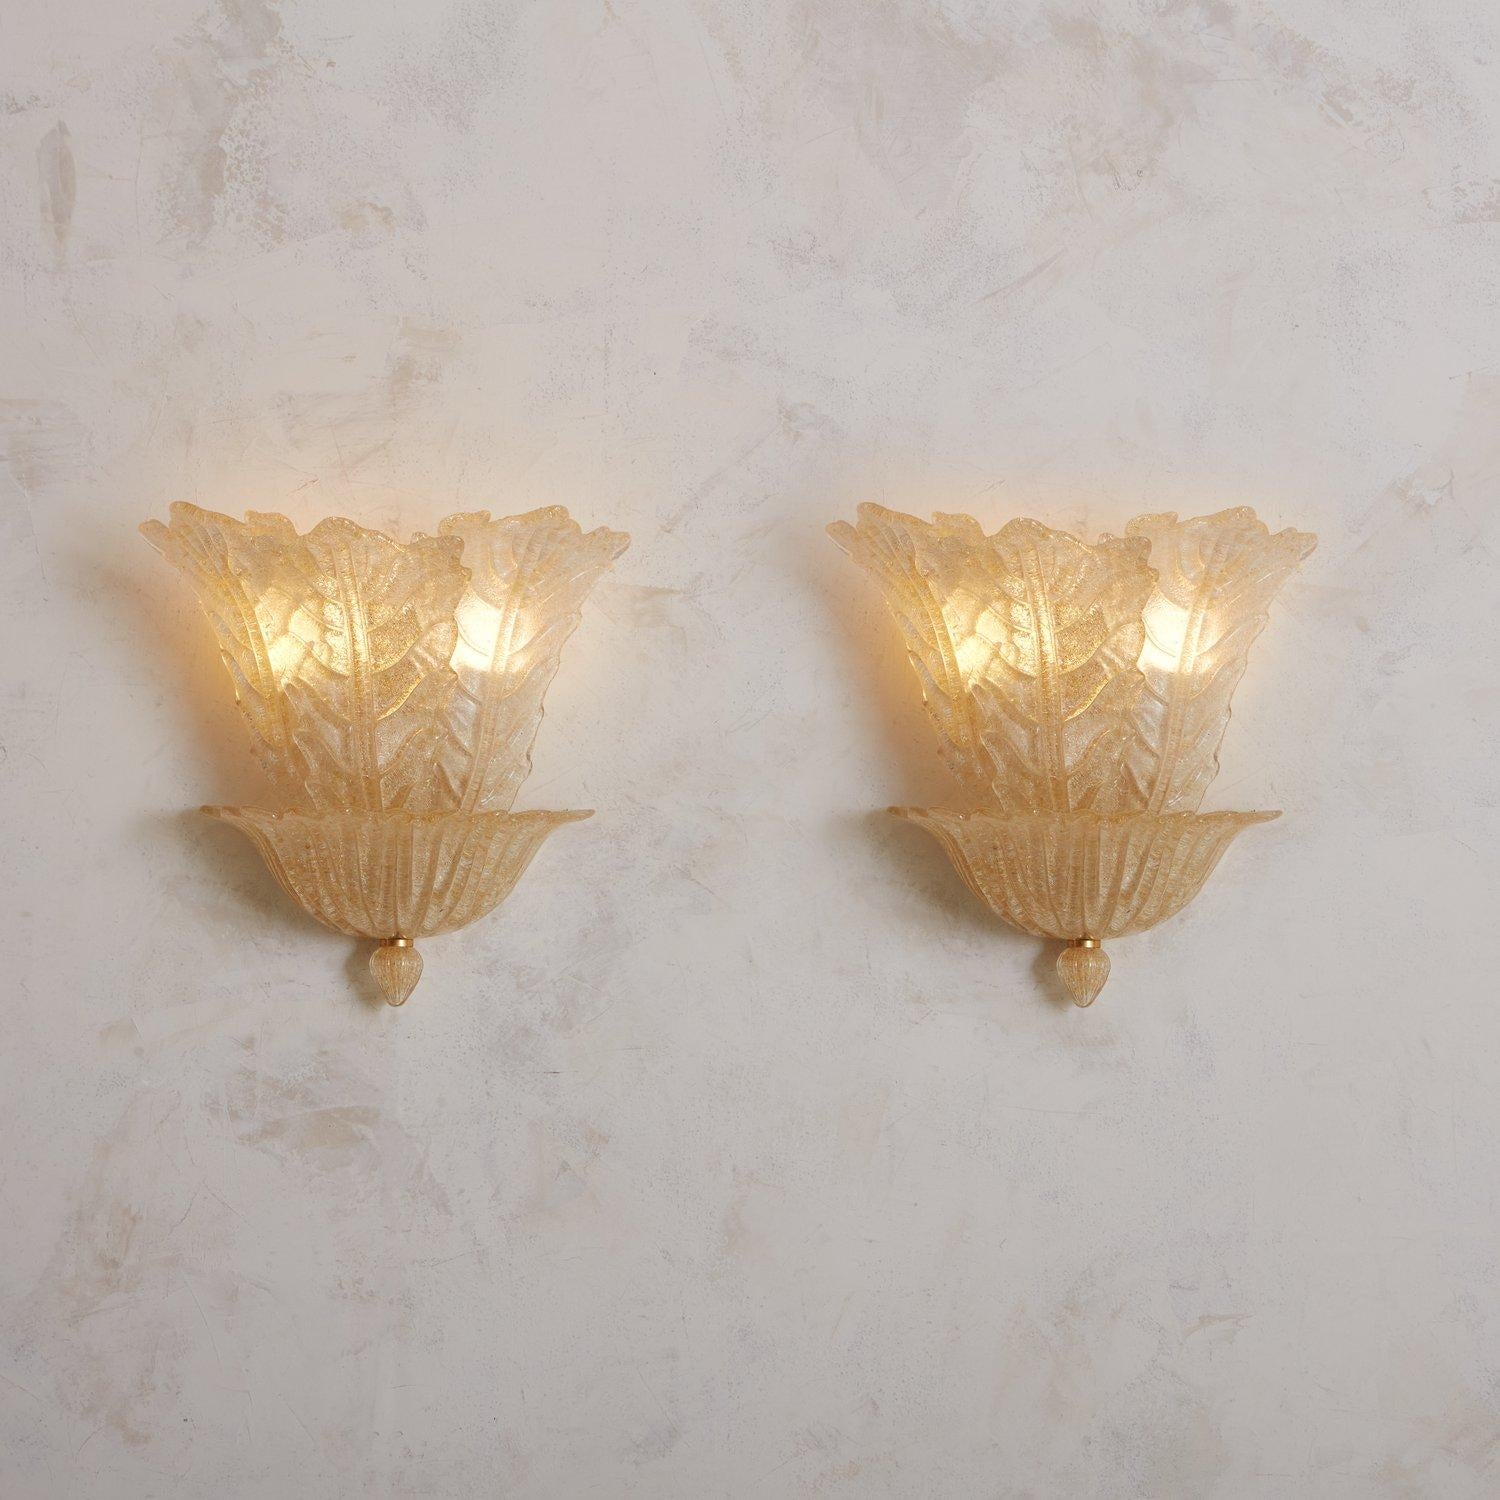 A vintage hand blown Murano glass sconce in an opalescent peach hue with beautiful, realistic textural details. This sconce has three leaf motifs which sprout from a flared demilune base with a bottom finial and brass detail. Sourced in Italy,